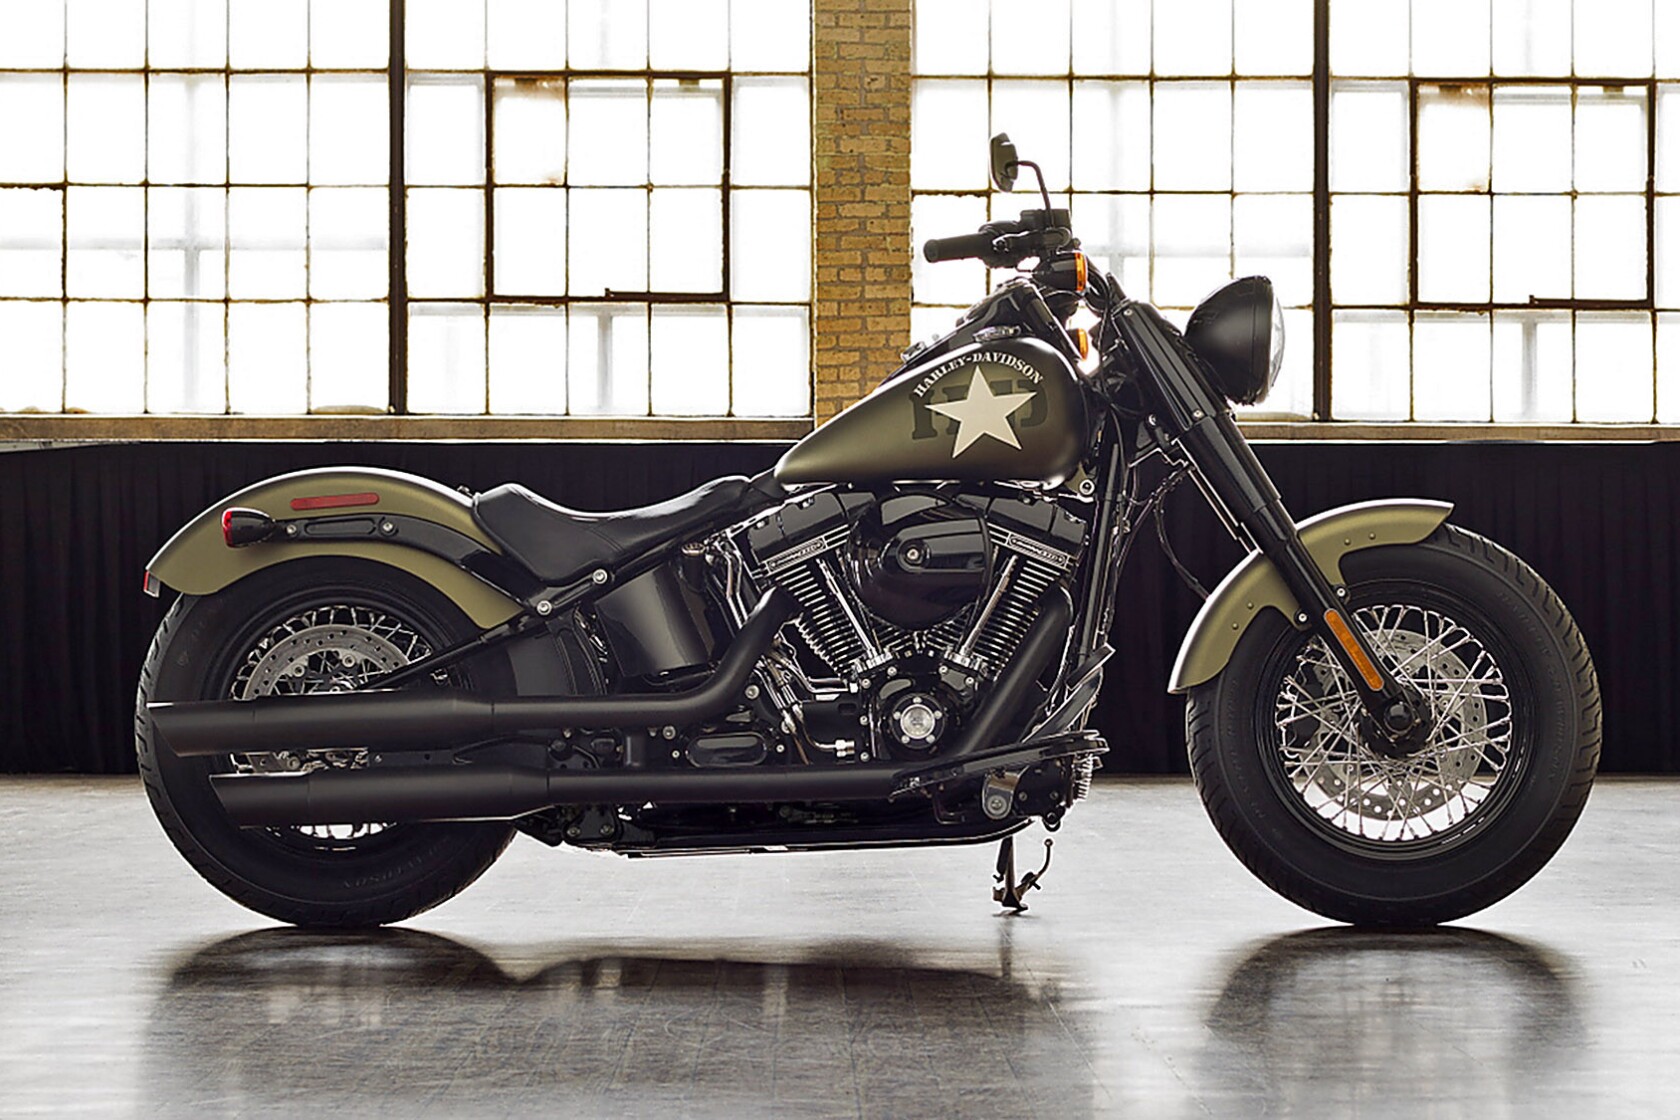 Harley-Davidson adds two new models to 2016 line - Los Angeles Times